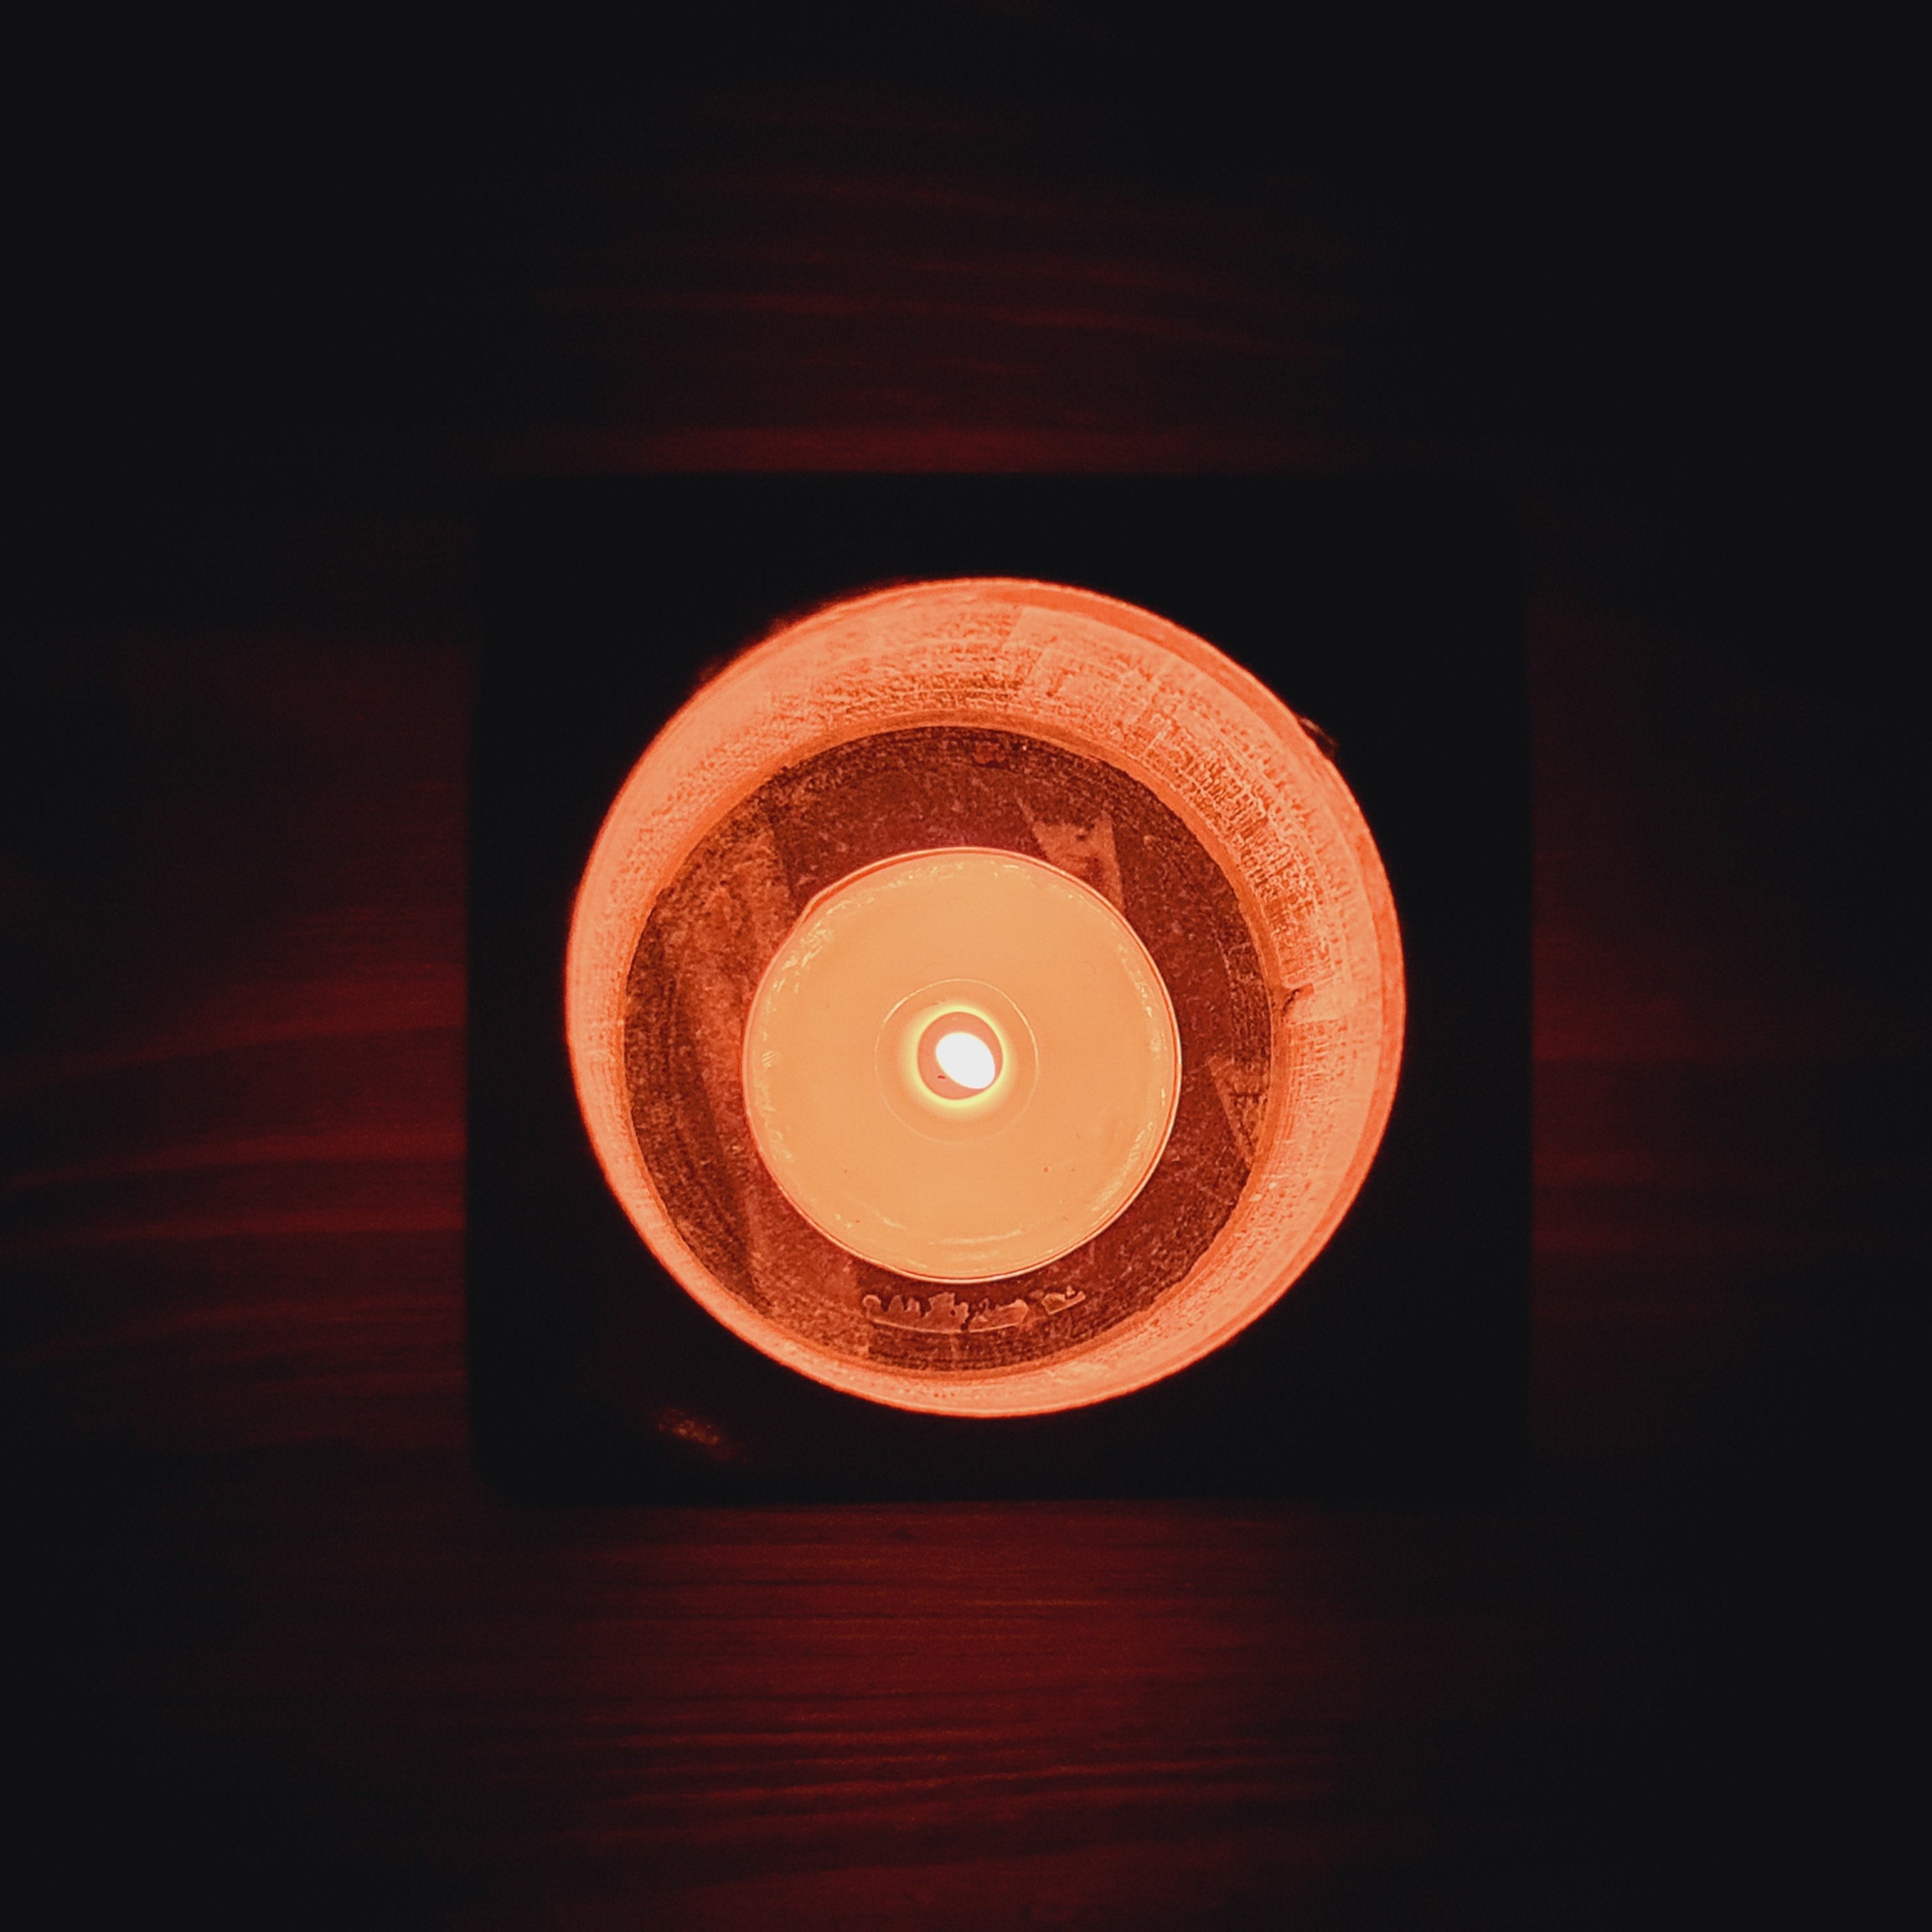 Selenite Tealight with black marble - Square